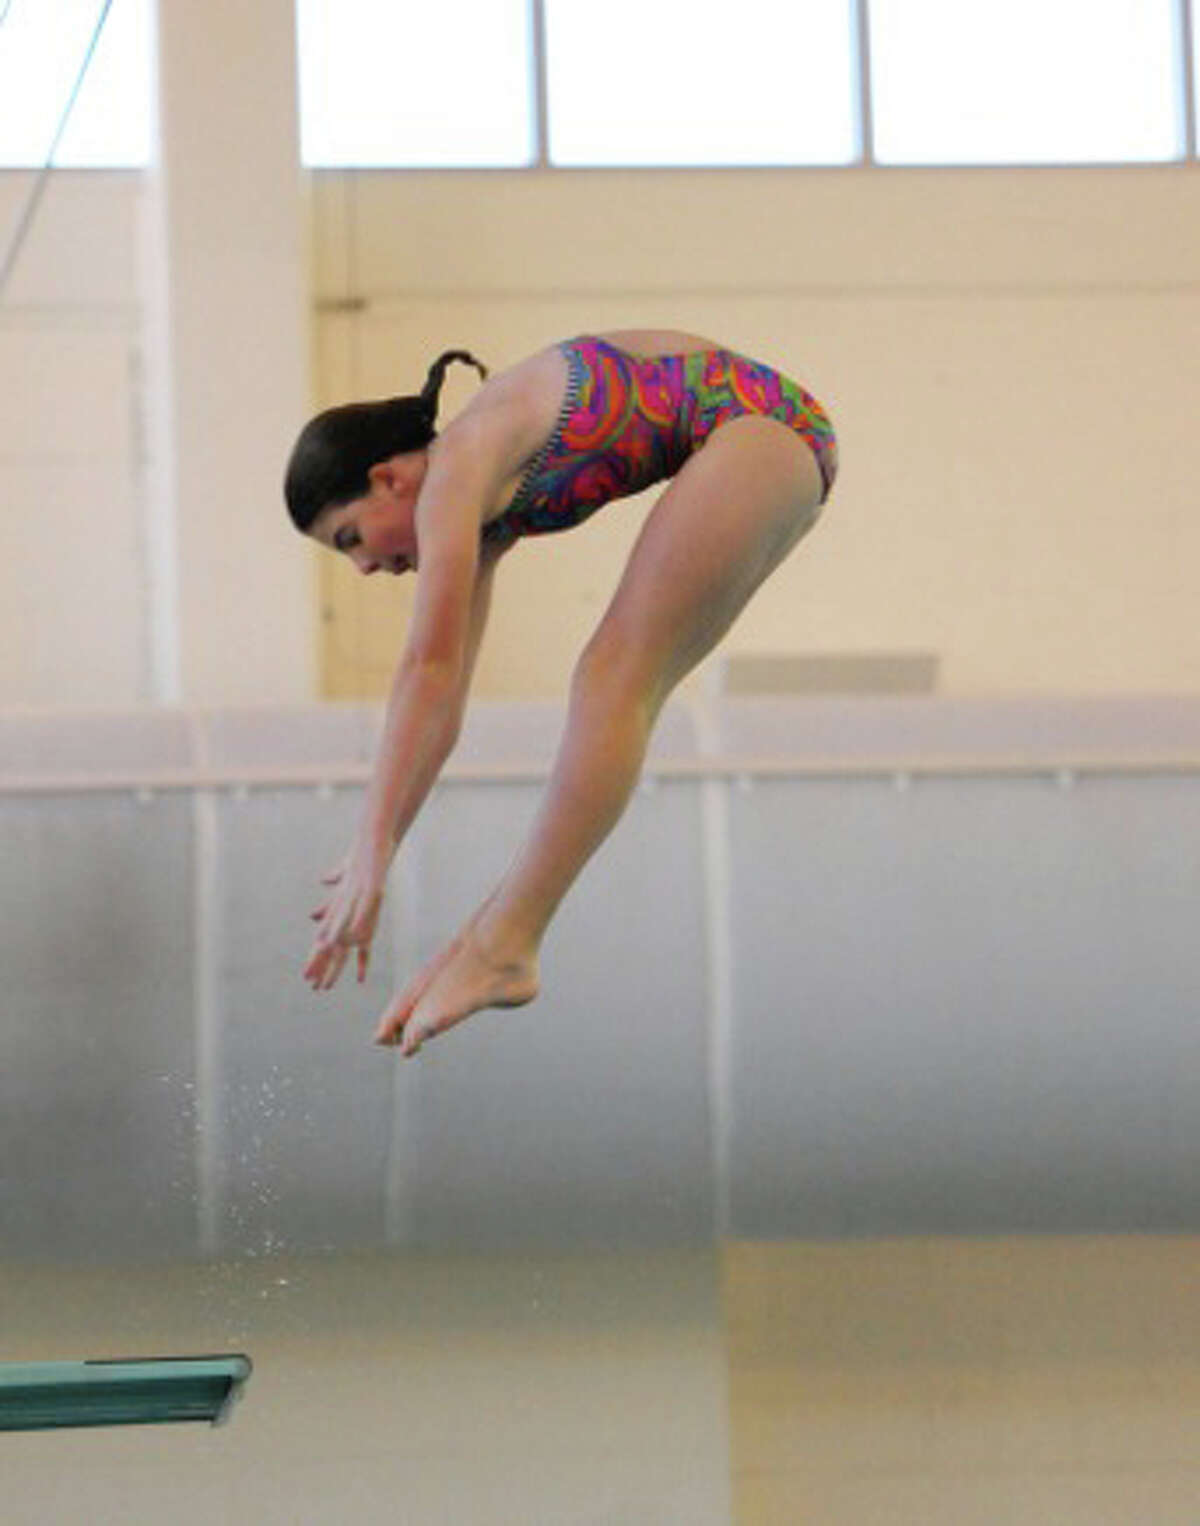 Rachel Dye of the Greenwich Marlins qualified for the USA Diving Spring East National Competition, which will be held in Rockville, MD April 13-15.